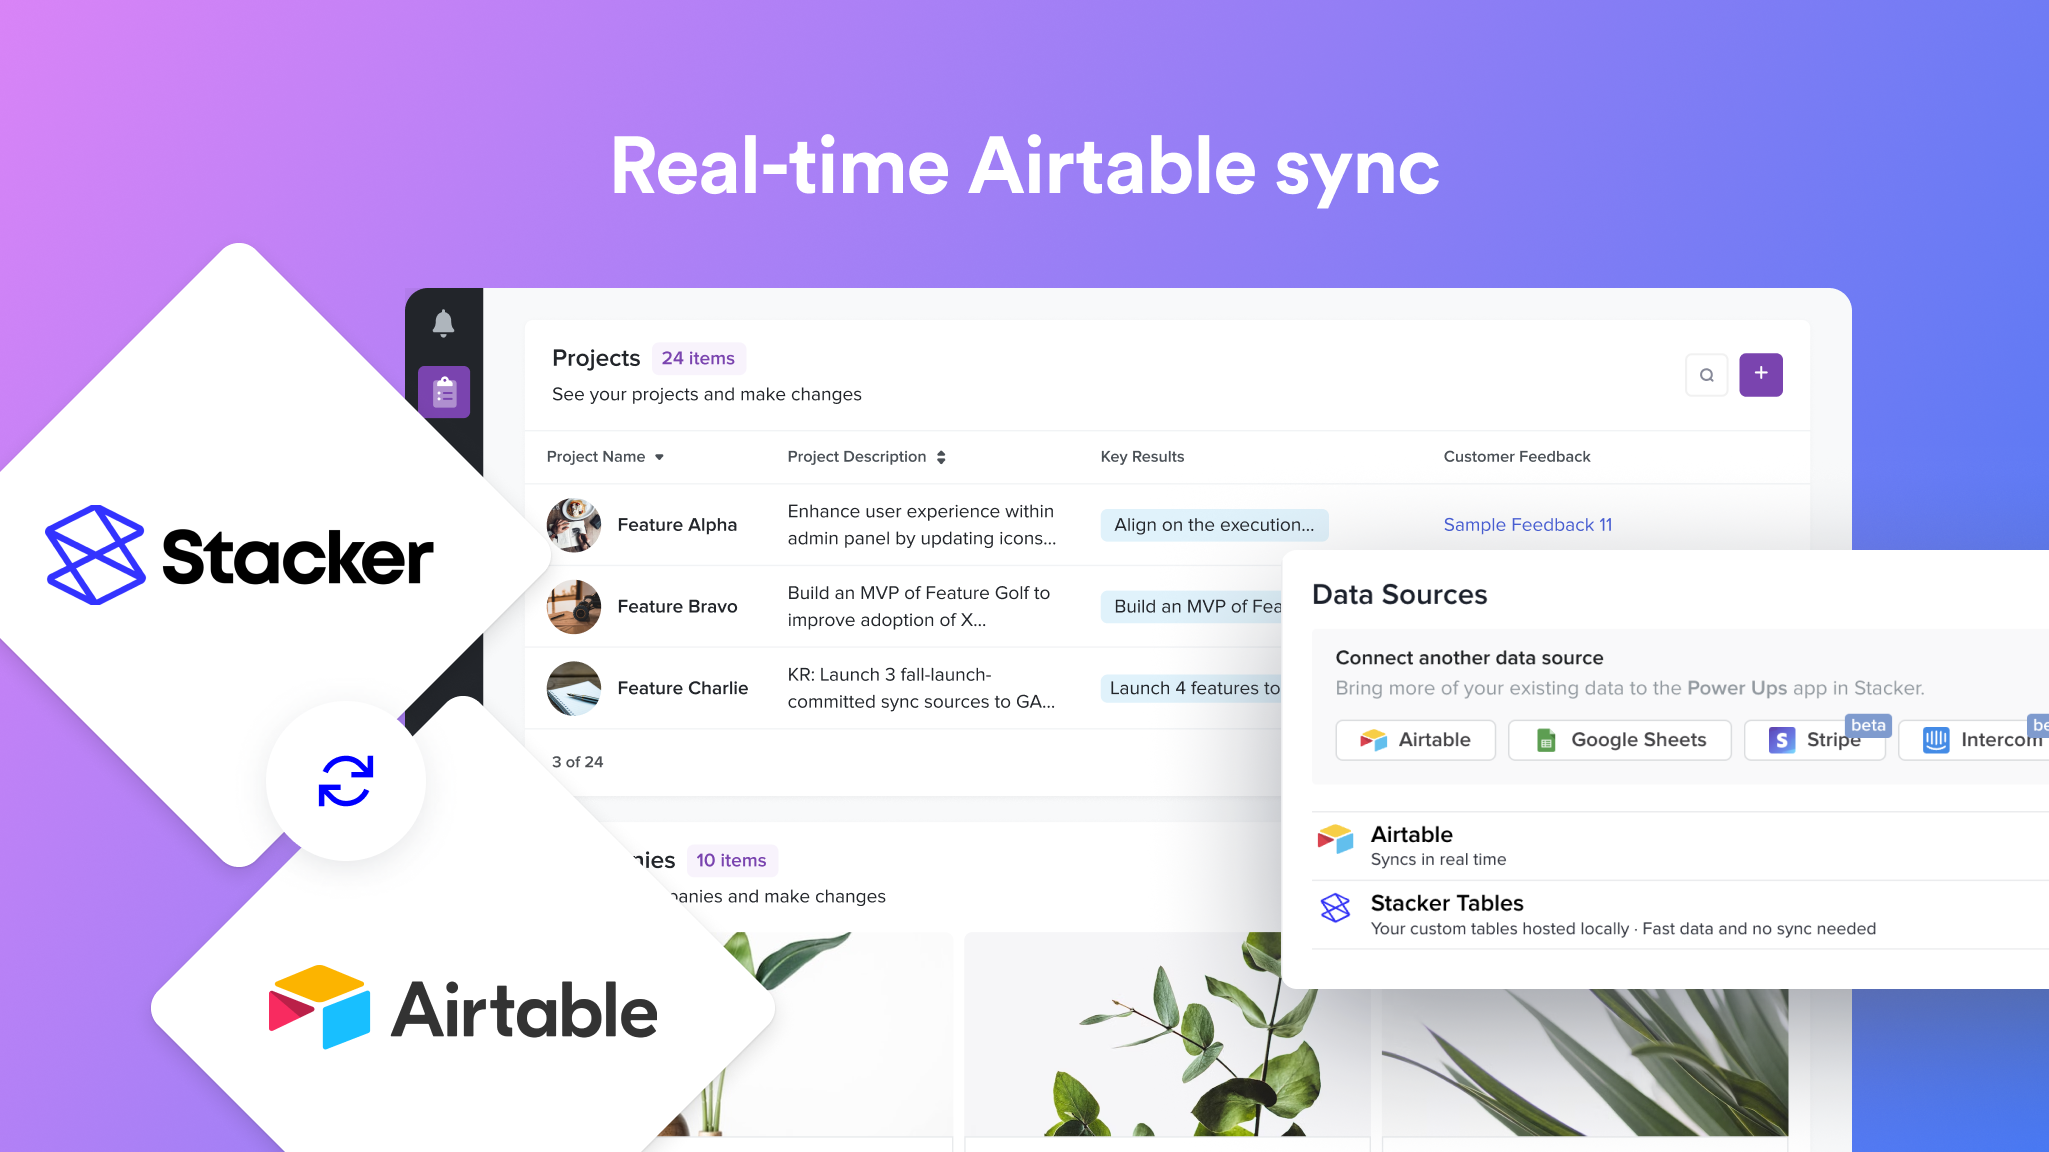 01 - Real-time Airtable sync